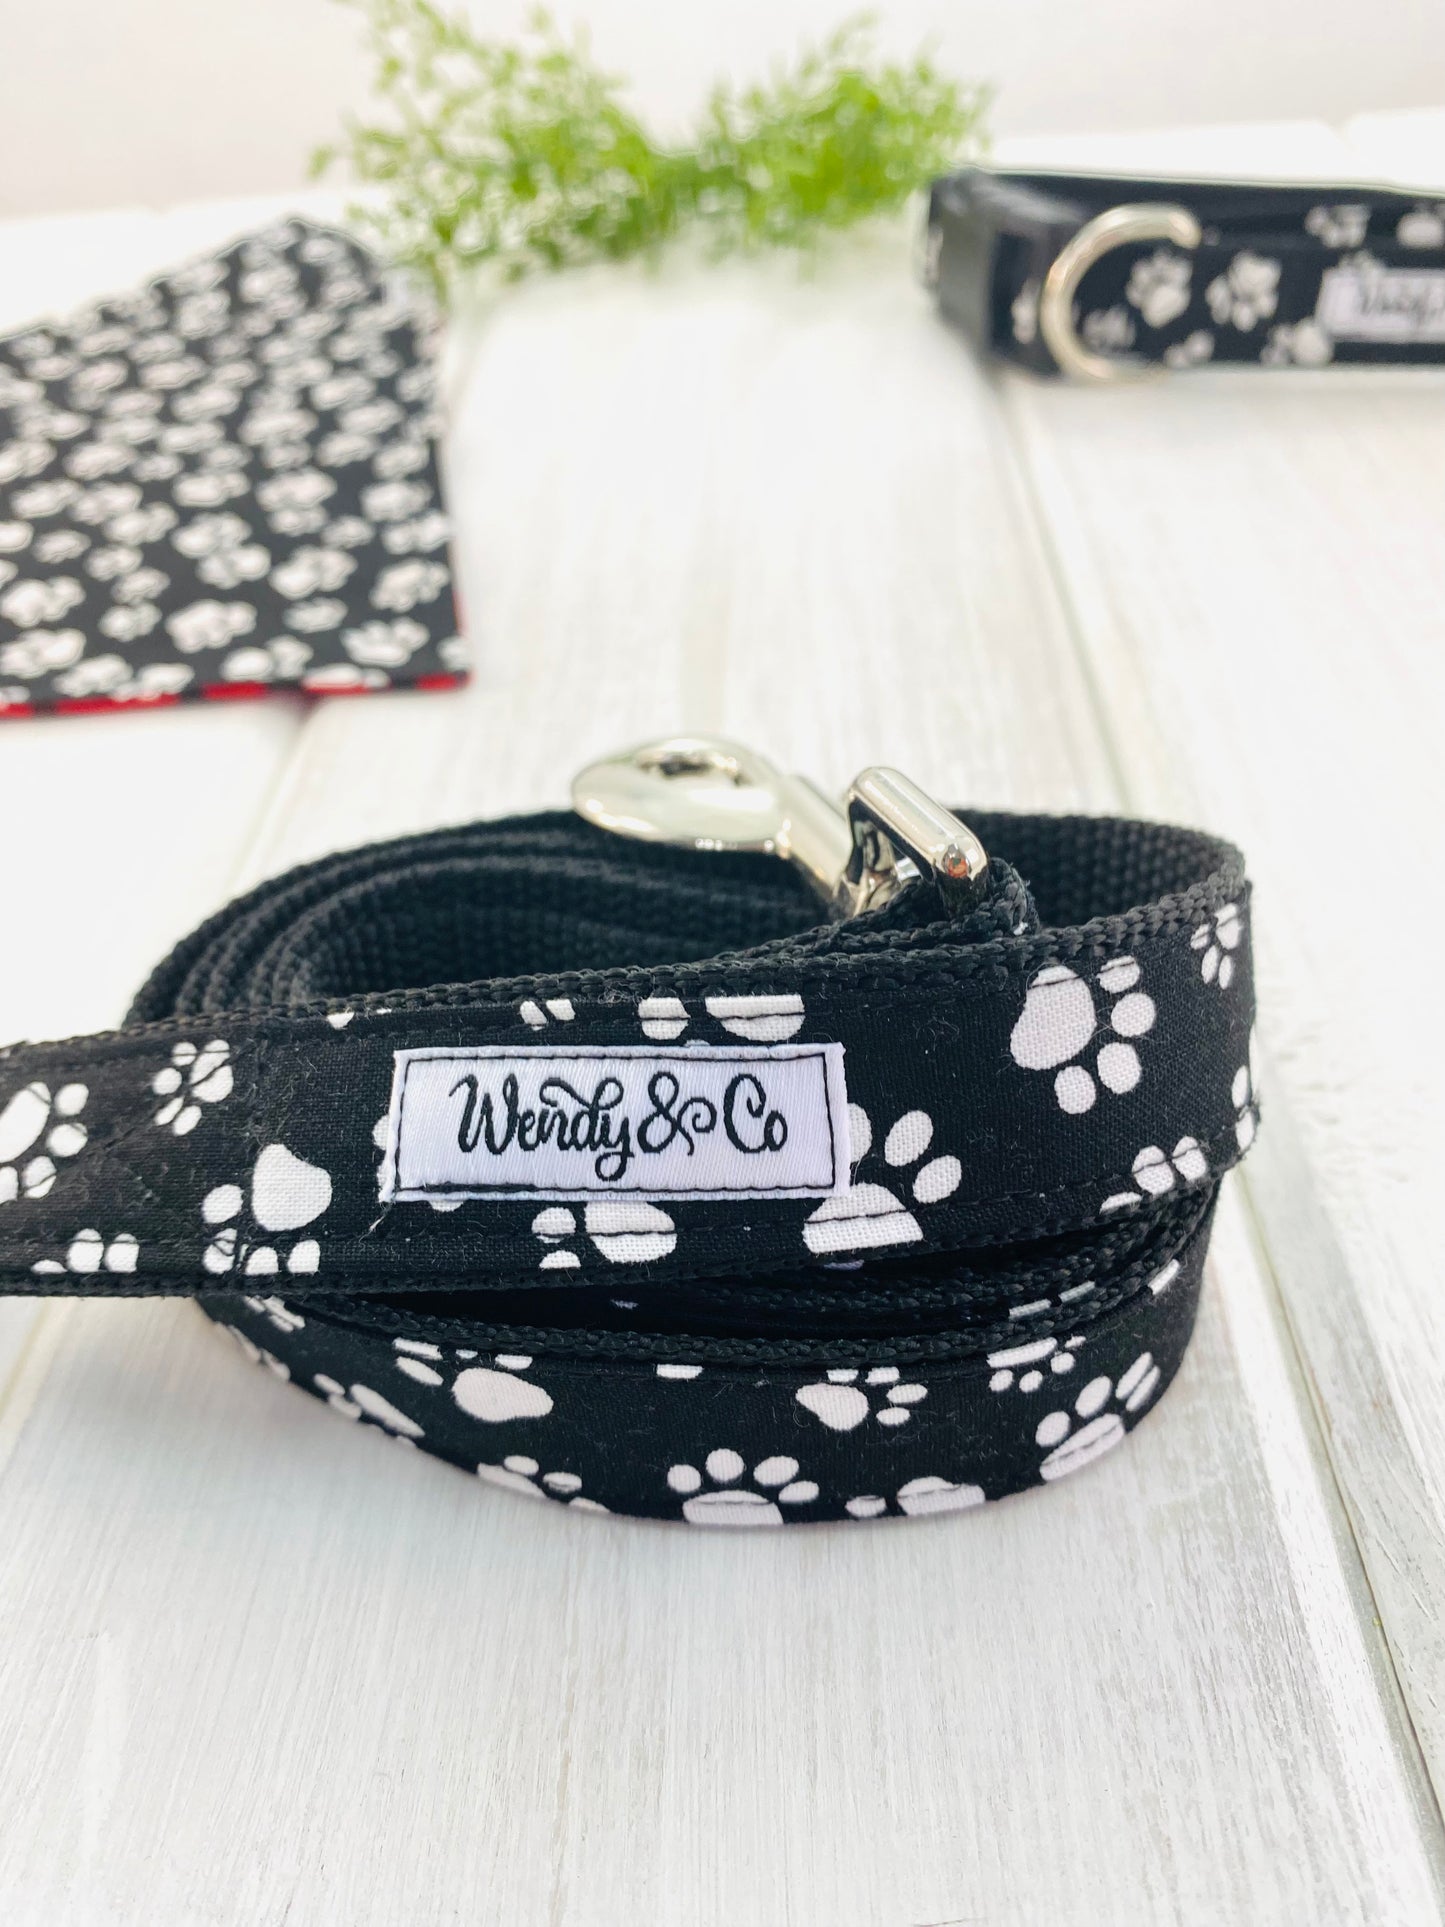 Black with white paws leash for large dogs.